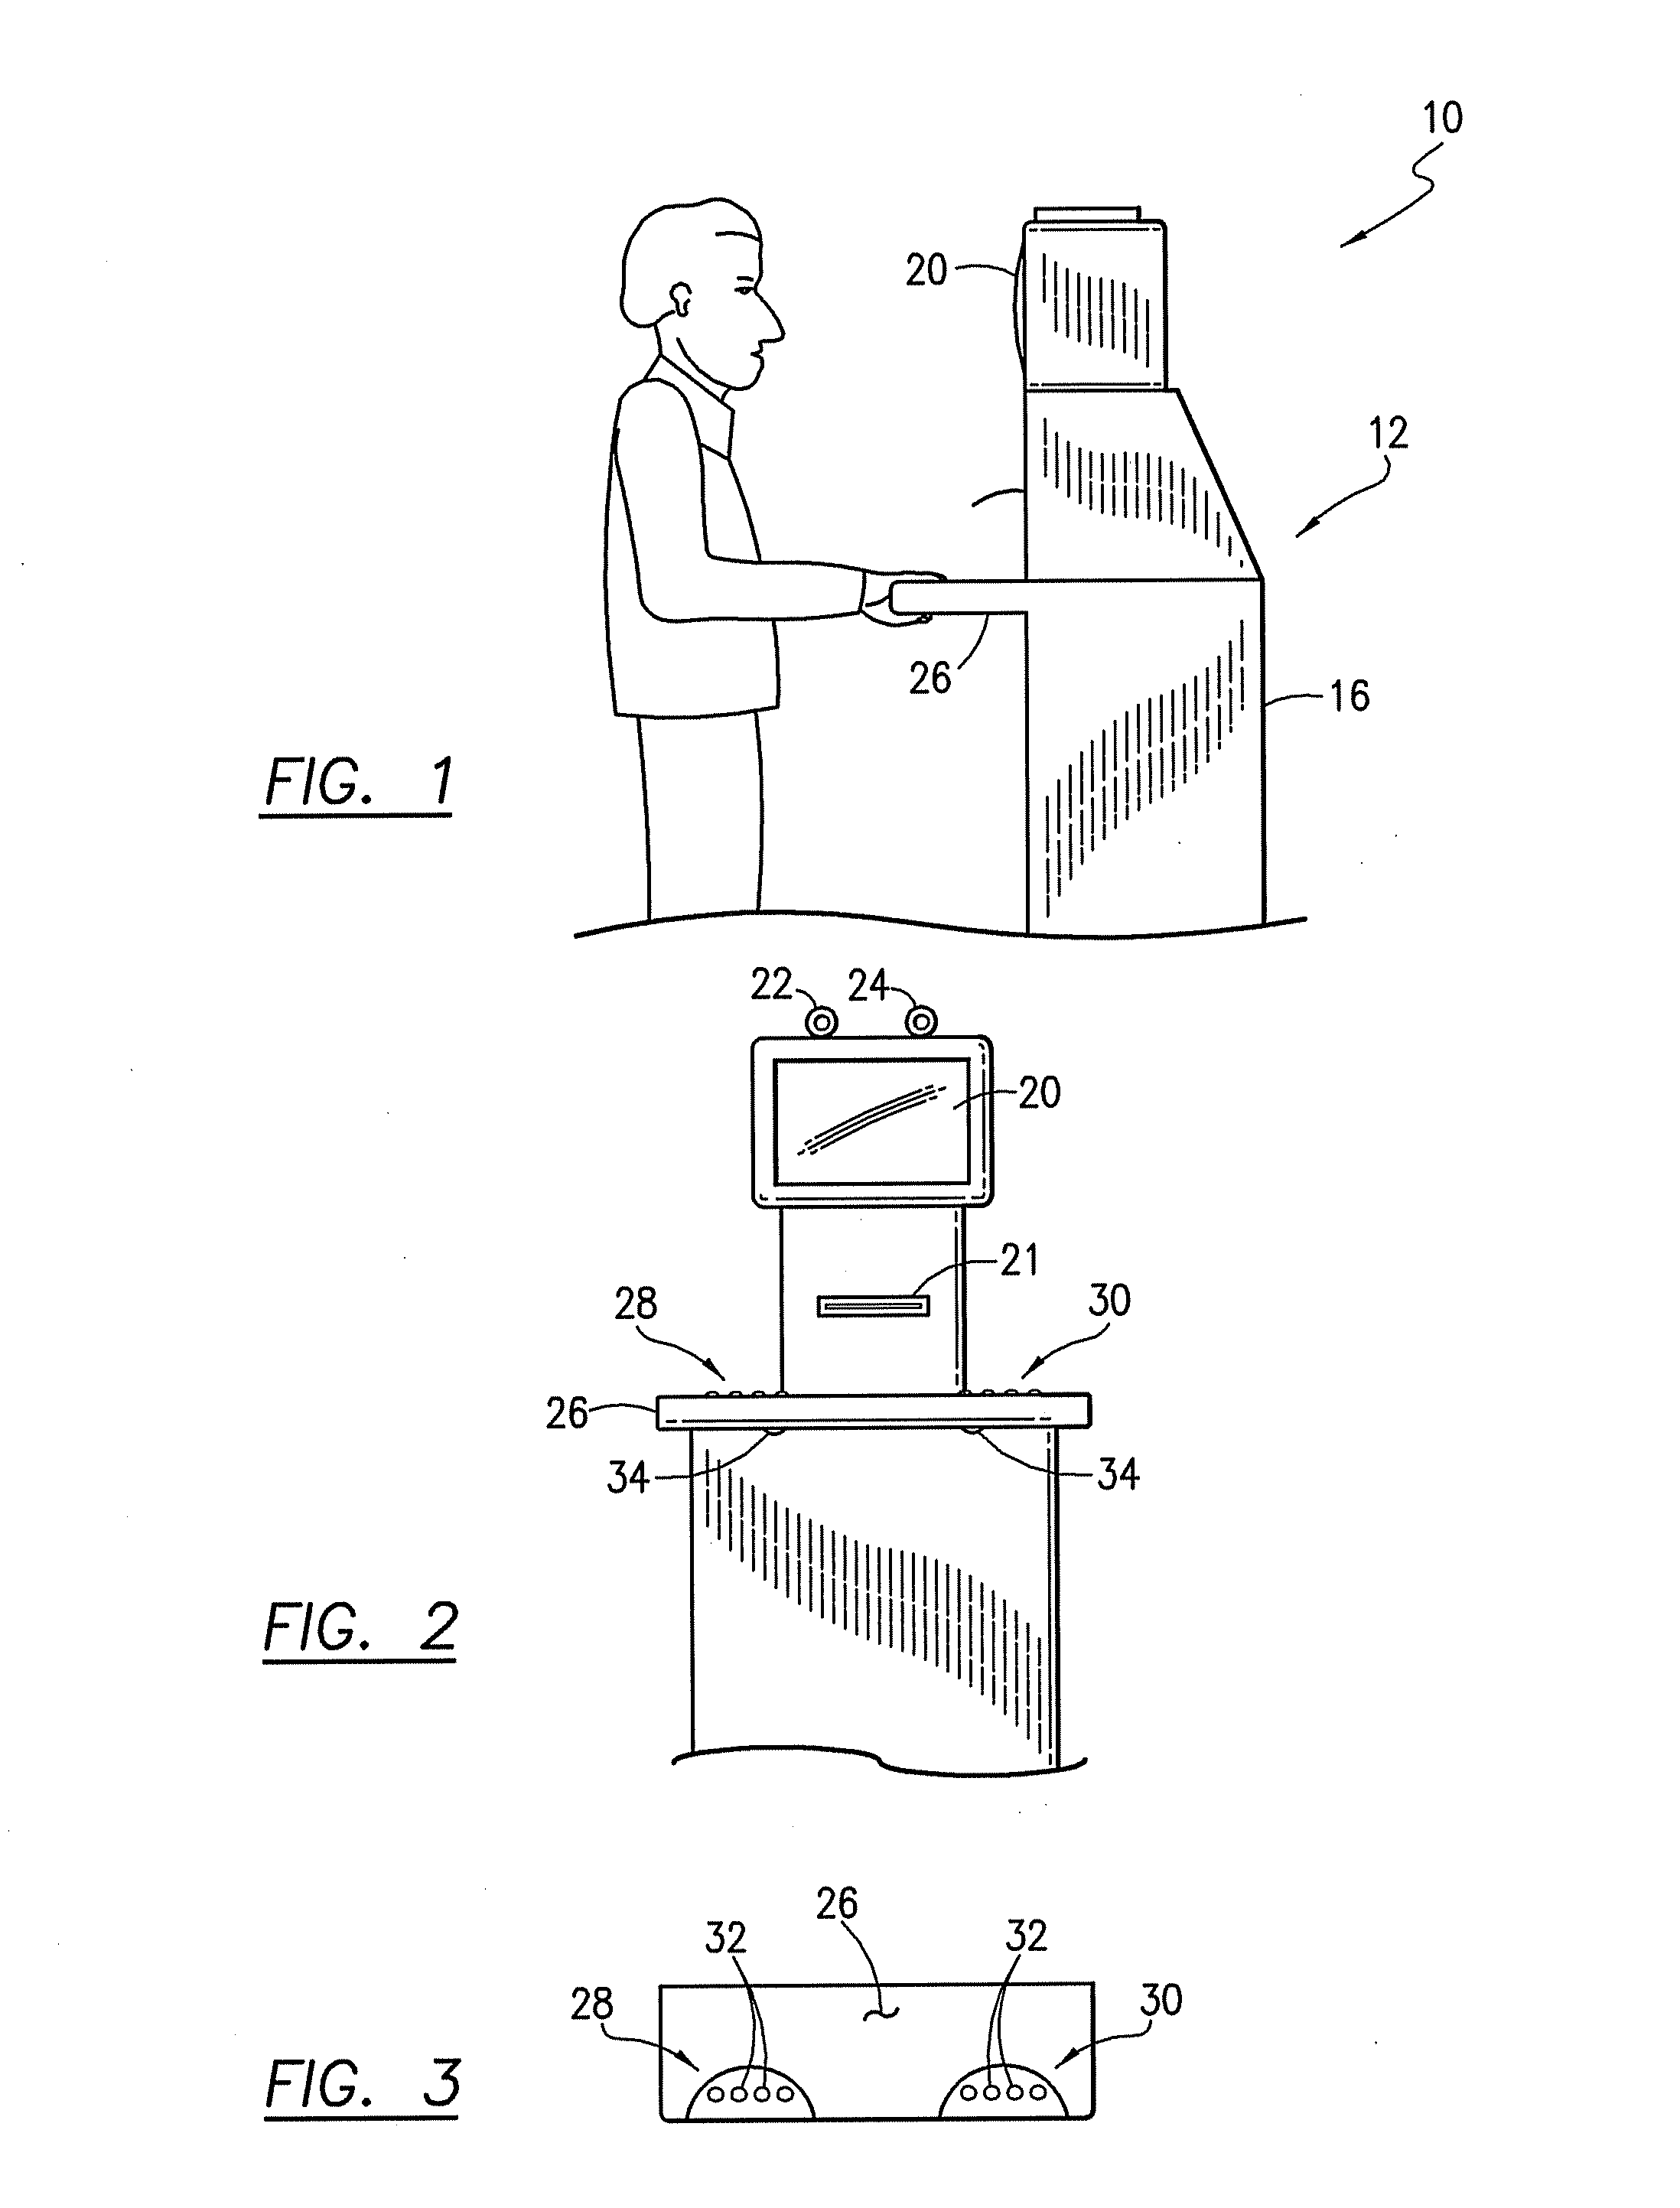 Method and apparatus for sensing and detecting physical, biological and chemical characteristics of a person